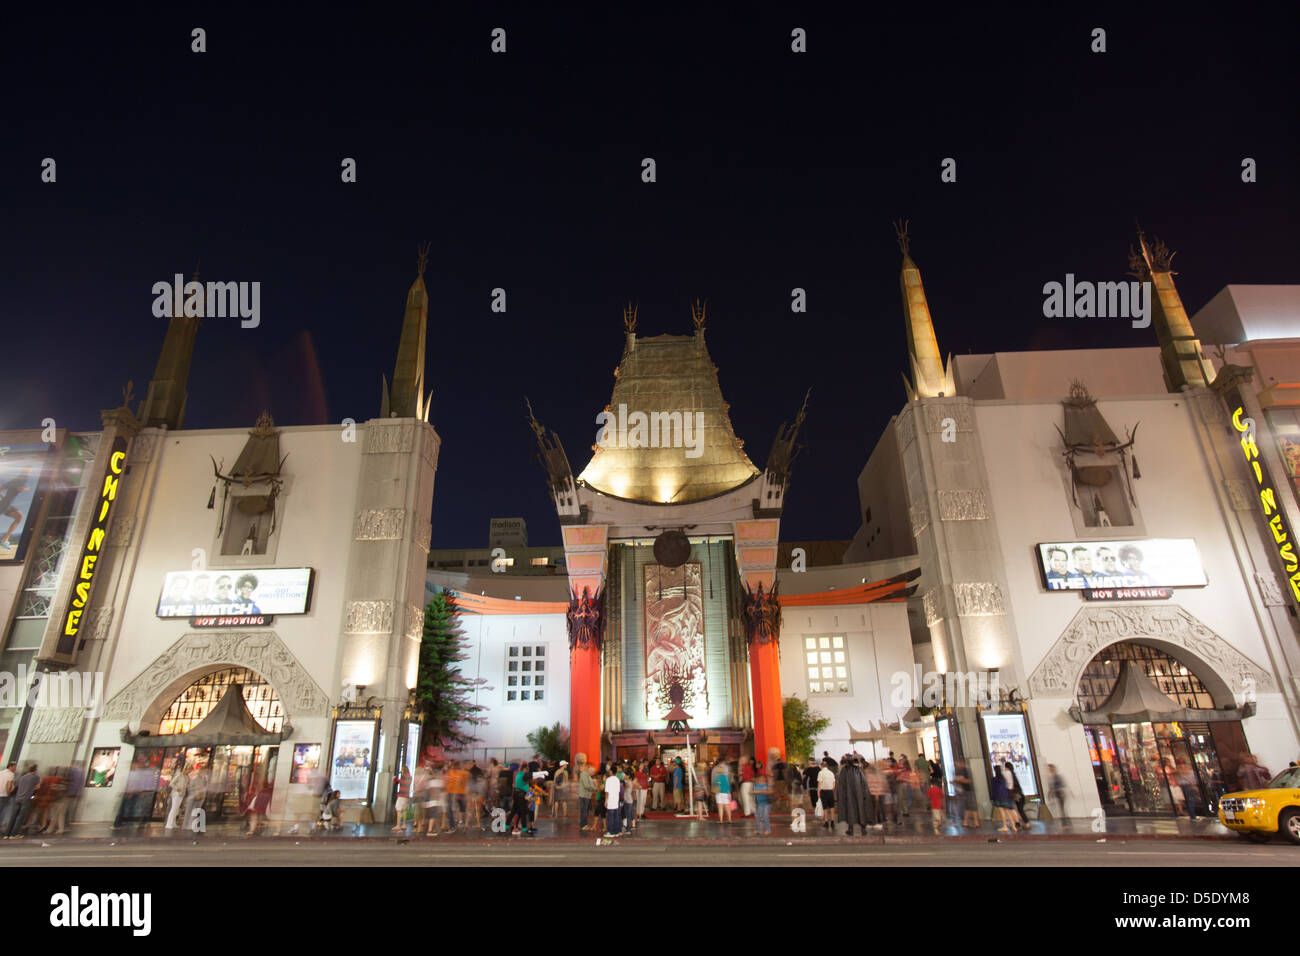 TCL (Grauman's) Chinese Theatre in Hollywood, Los Angeles, CA Stock Photo